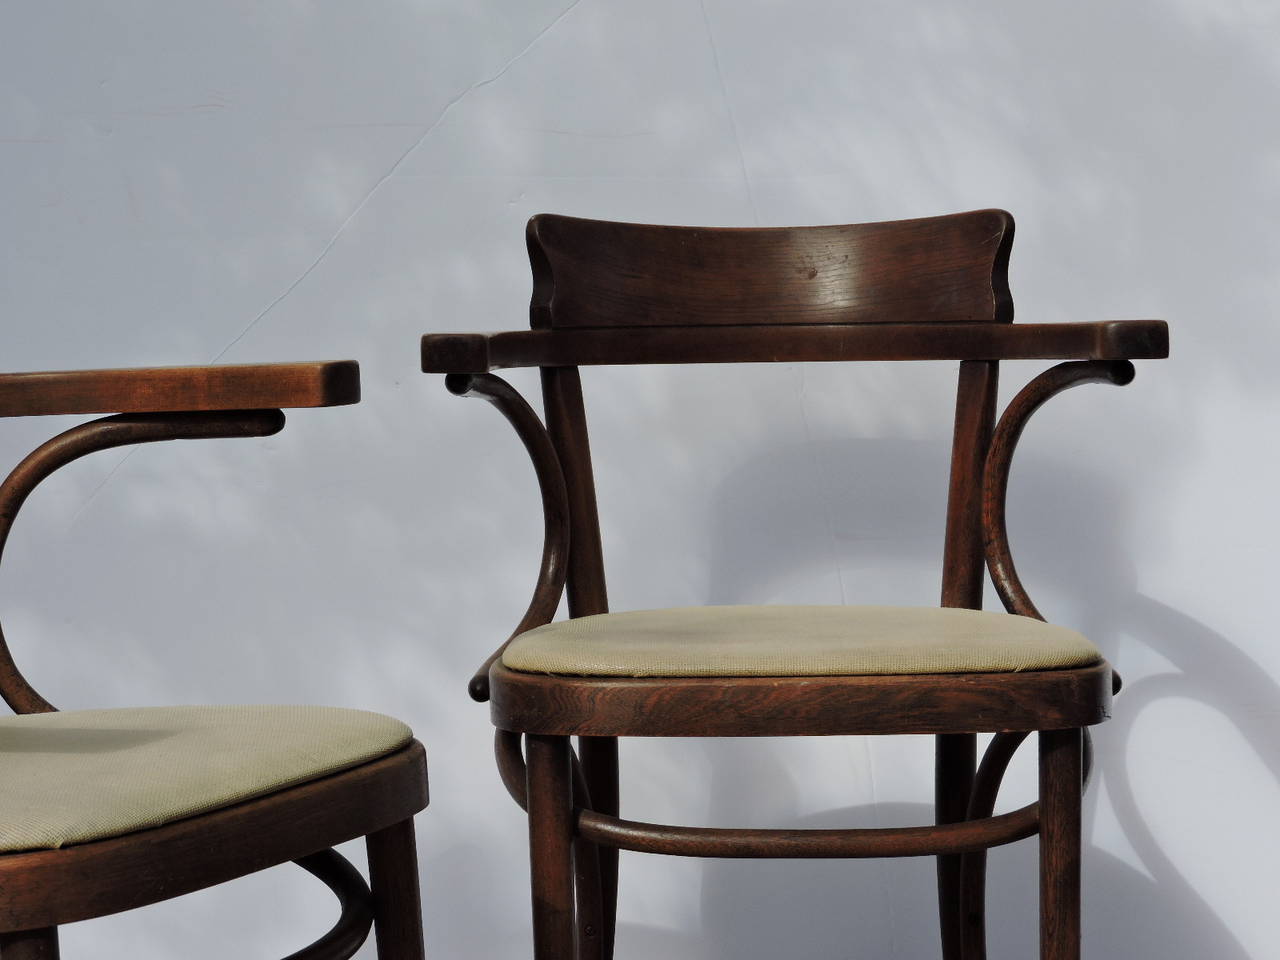 A matched set of four Thonet Bentwood cafe armchairs in the style of Mundus. All chairs in original nicely aged surface color. Thonet paper label under seat.  Circa 1920 - 1940